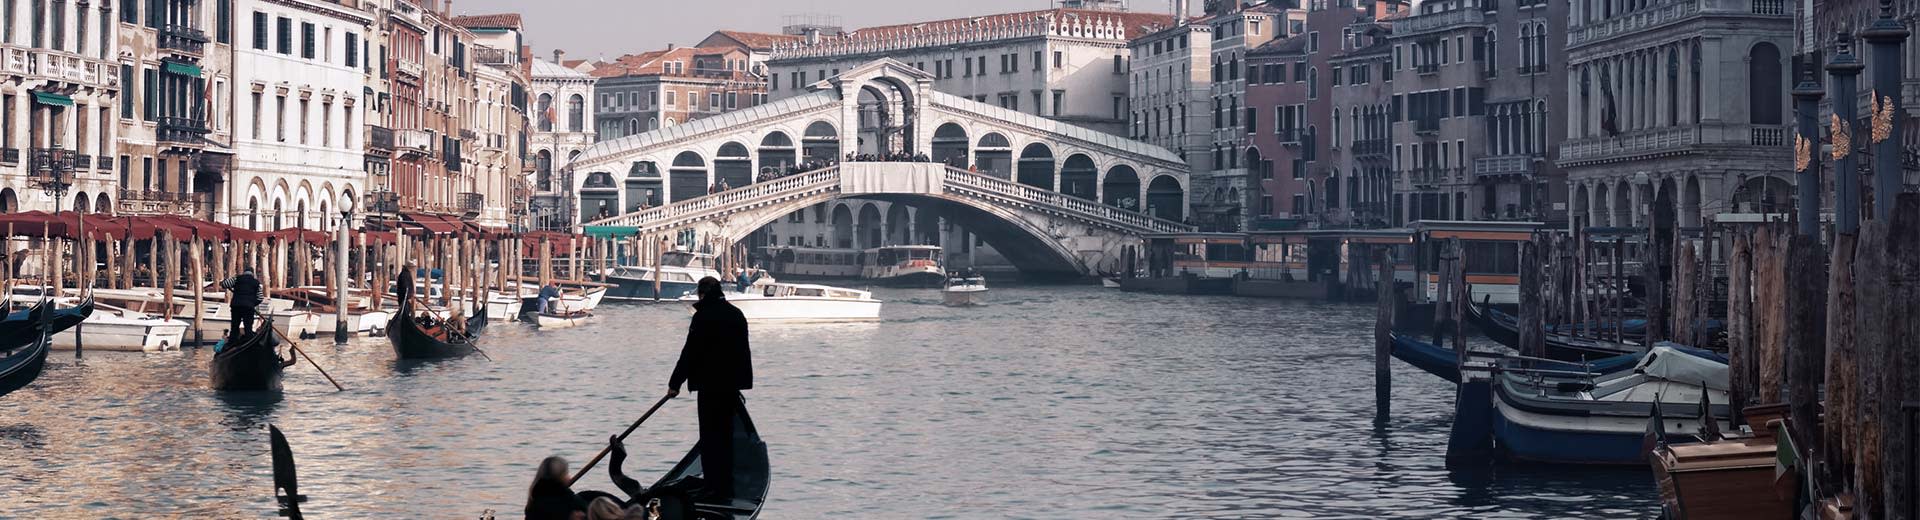 The waterways of Venice are full of Gondolas and their passengers, while in the background lies beautiful architecture.